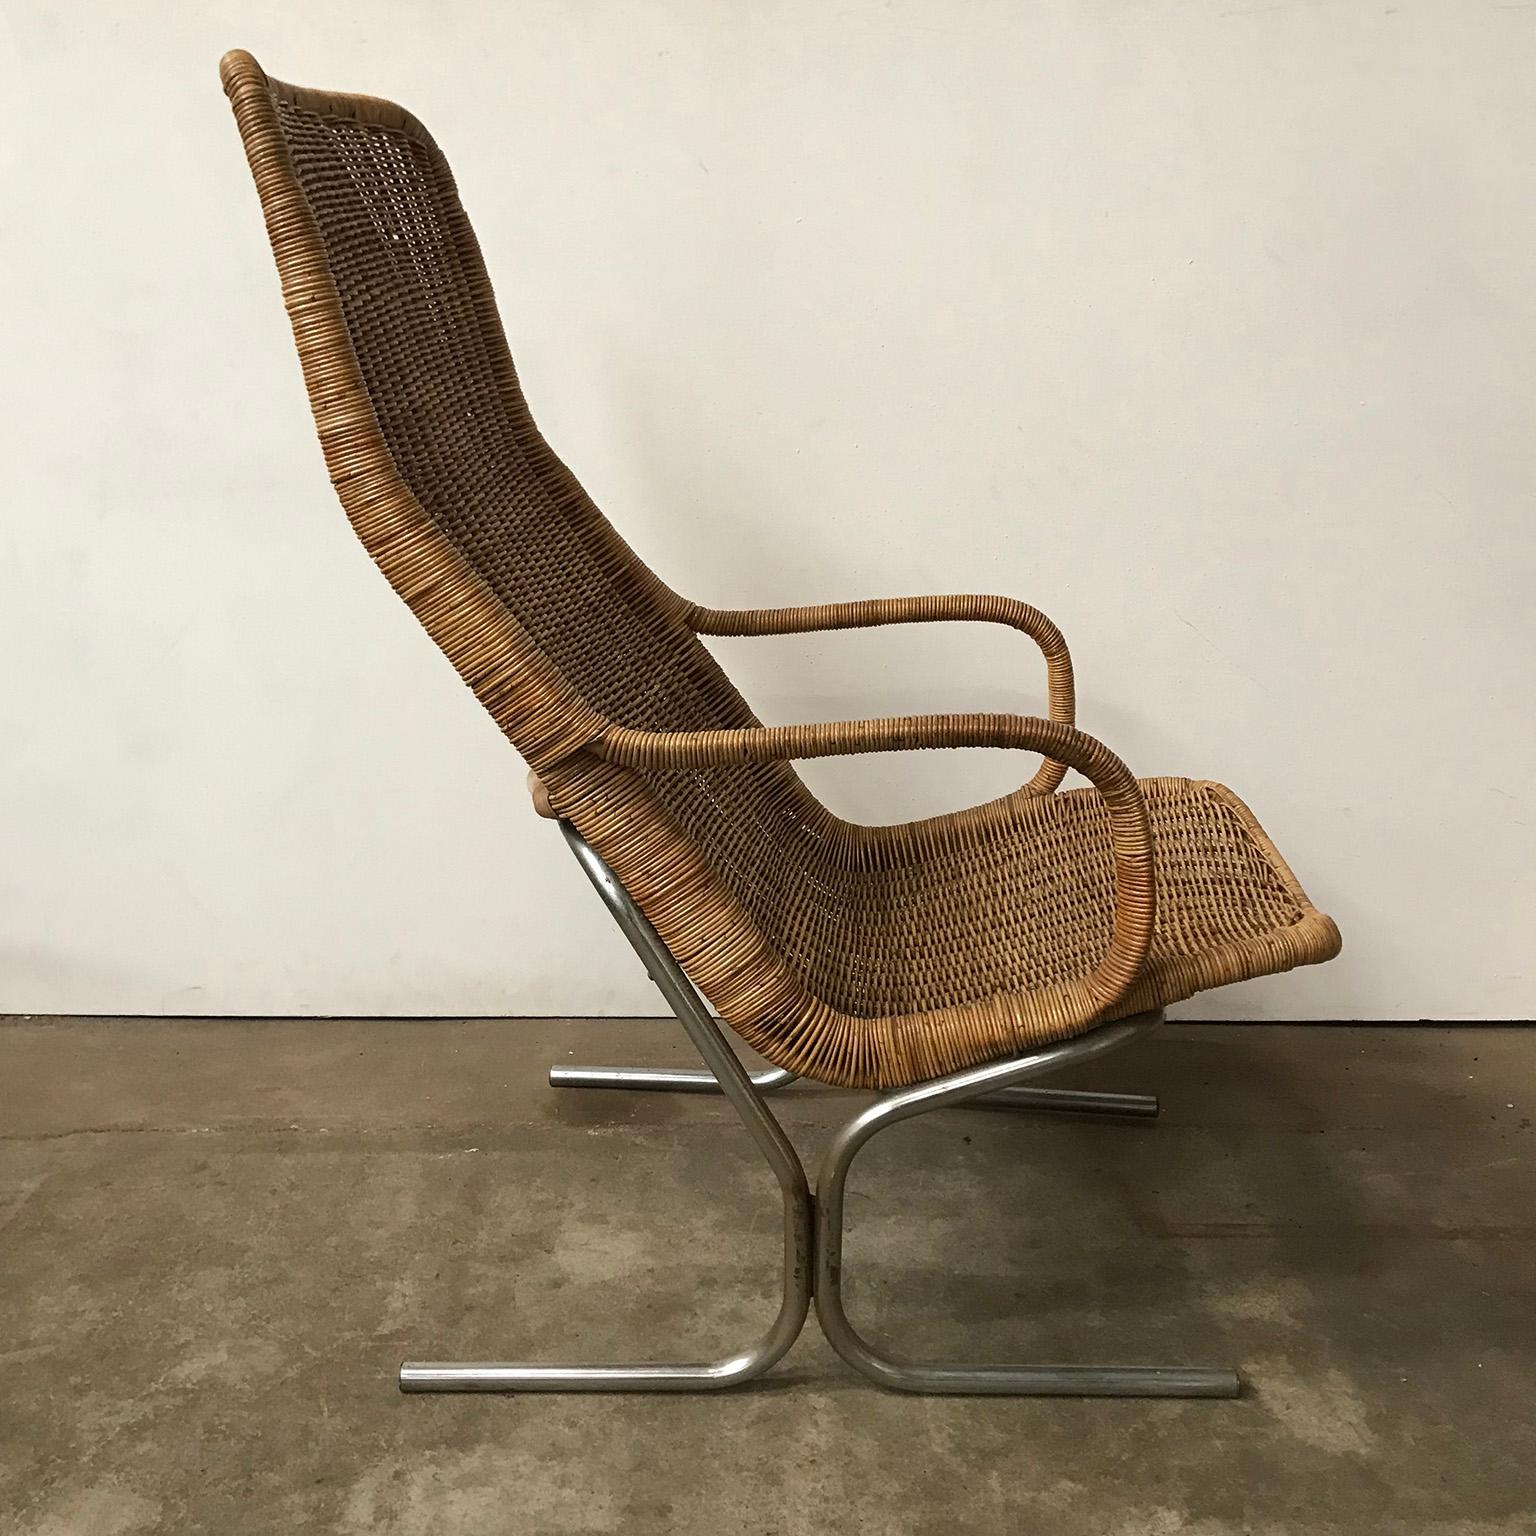 Dirk Van Sliedregt 514 wicker lounge chair for Brotheres Jonker in Noordwolde, Holland. This chair is still in the original wicker and in a fair condition. The wicker has a beautiful range of natural colours (#8). There are two tiny damages in the